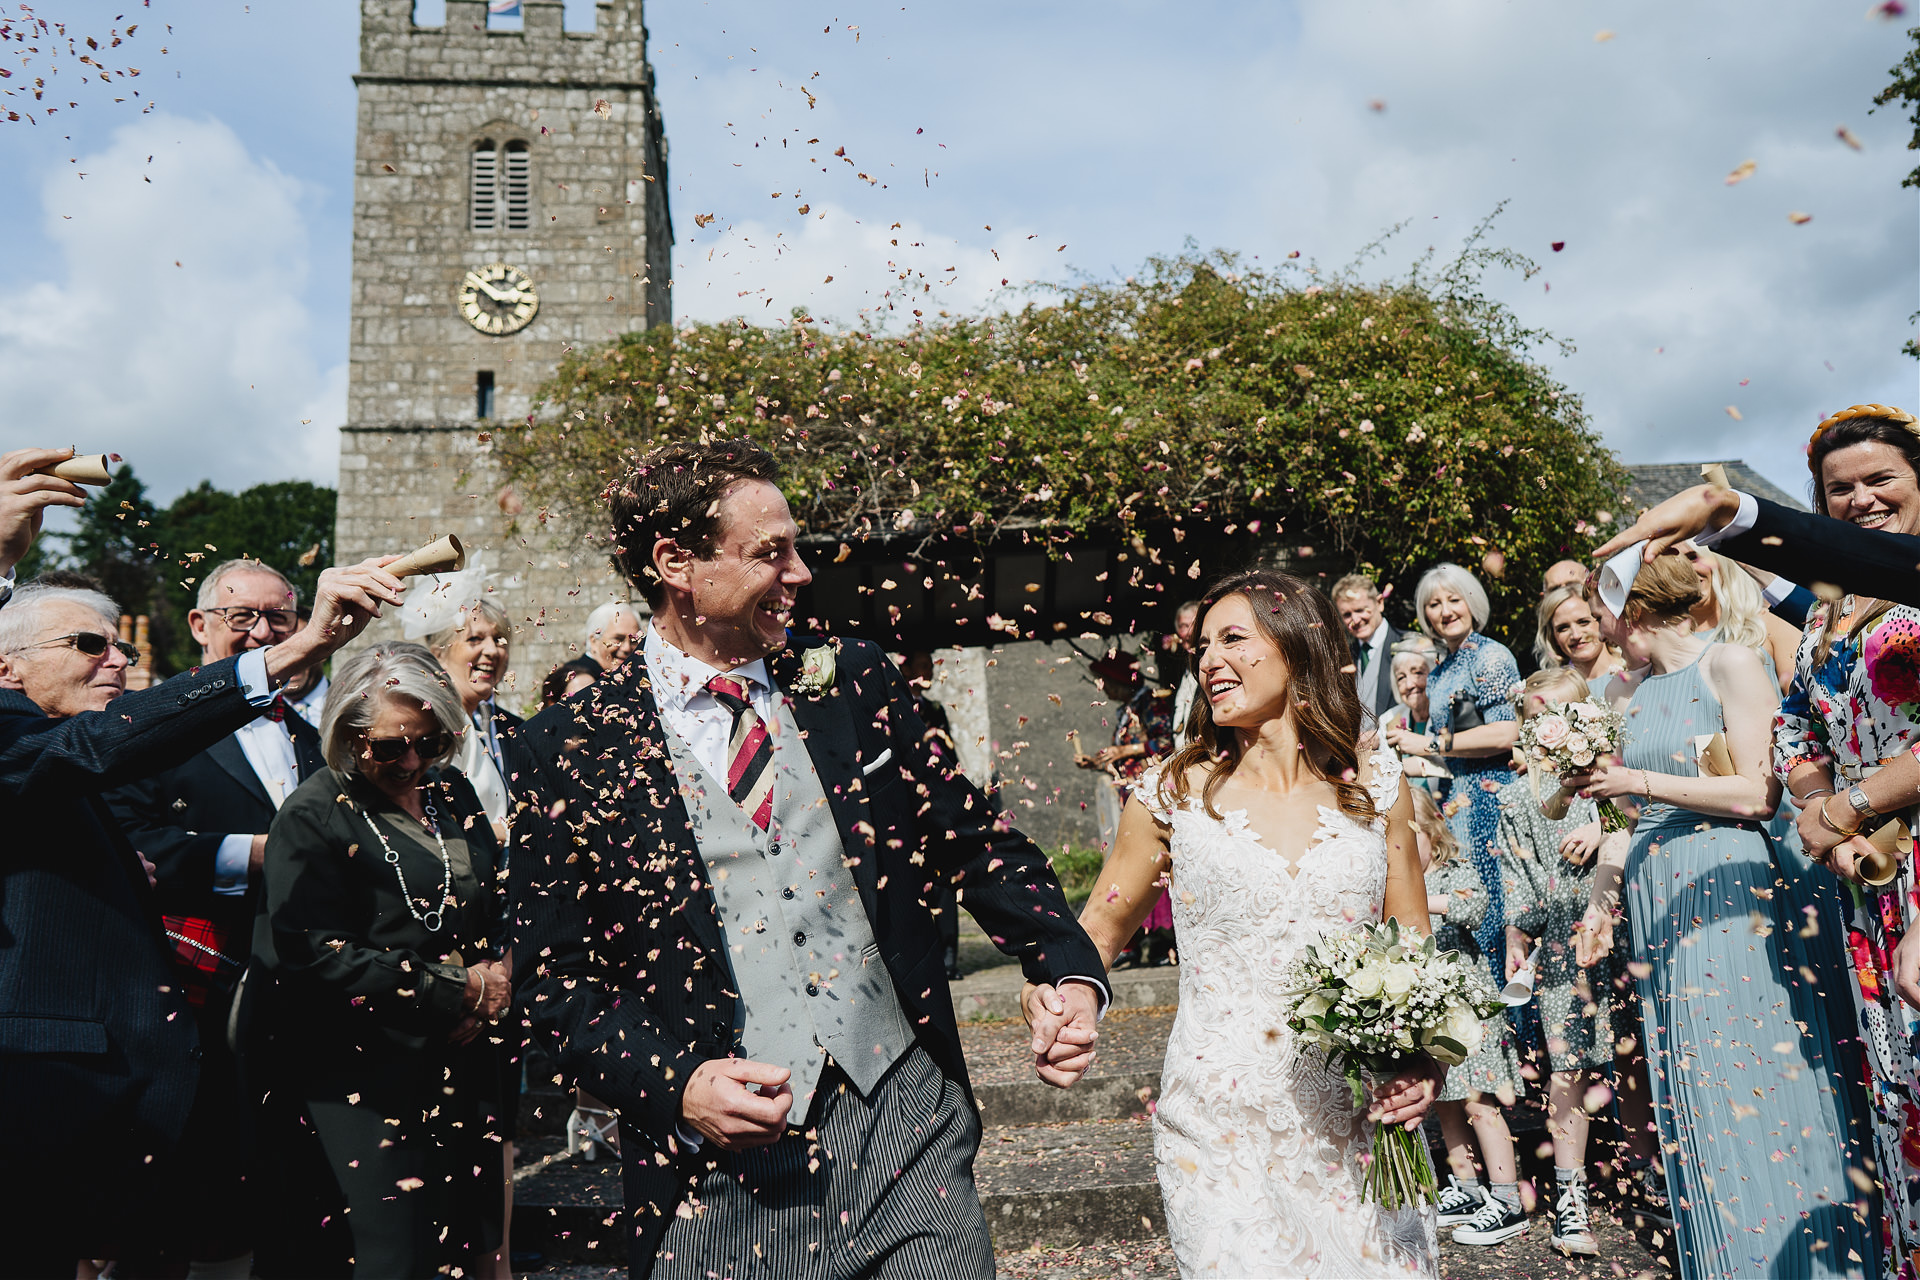 Bride and groom smiling at each other with wedding guests throwing confetti outside a church